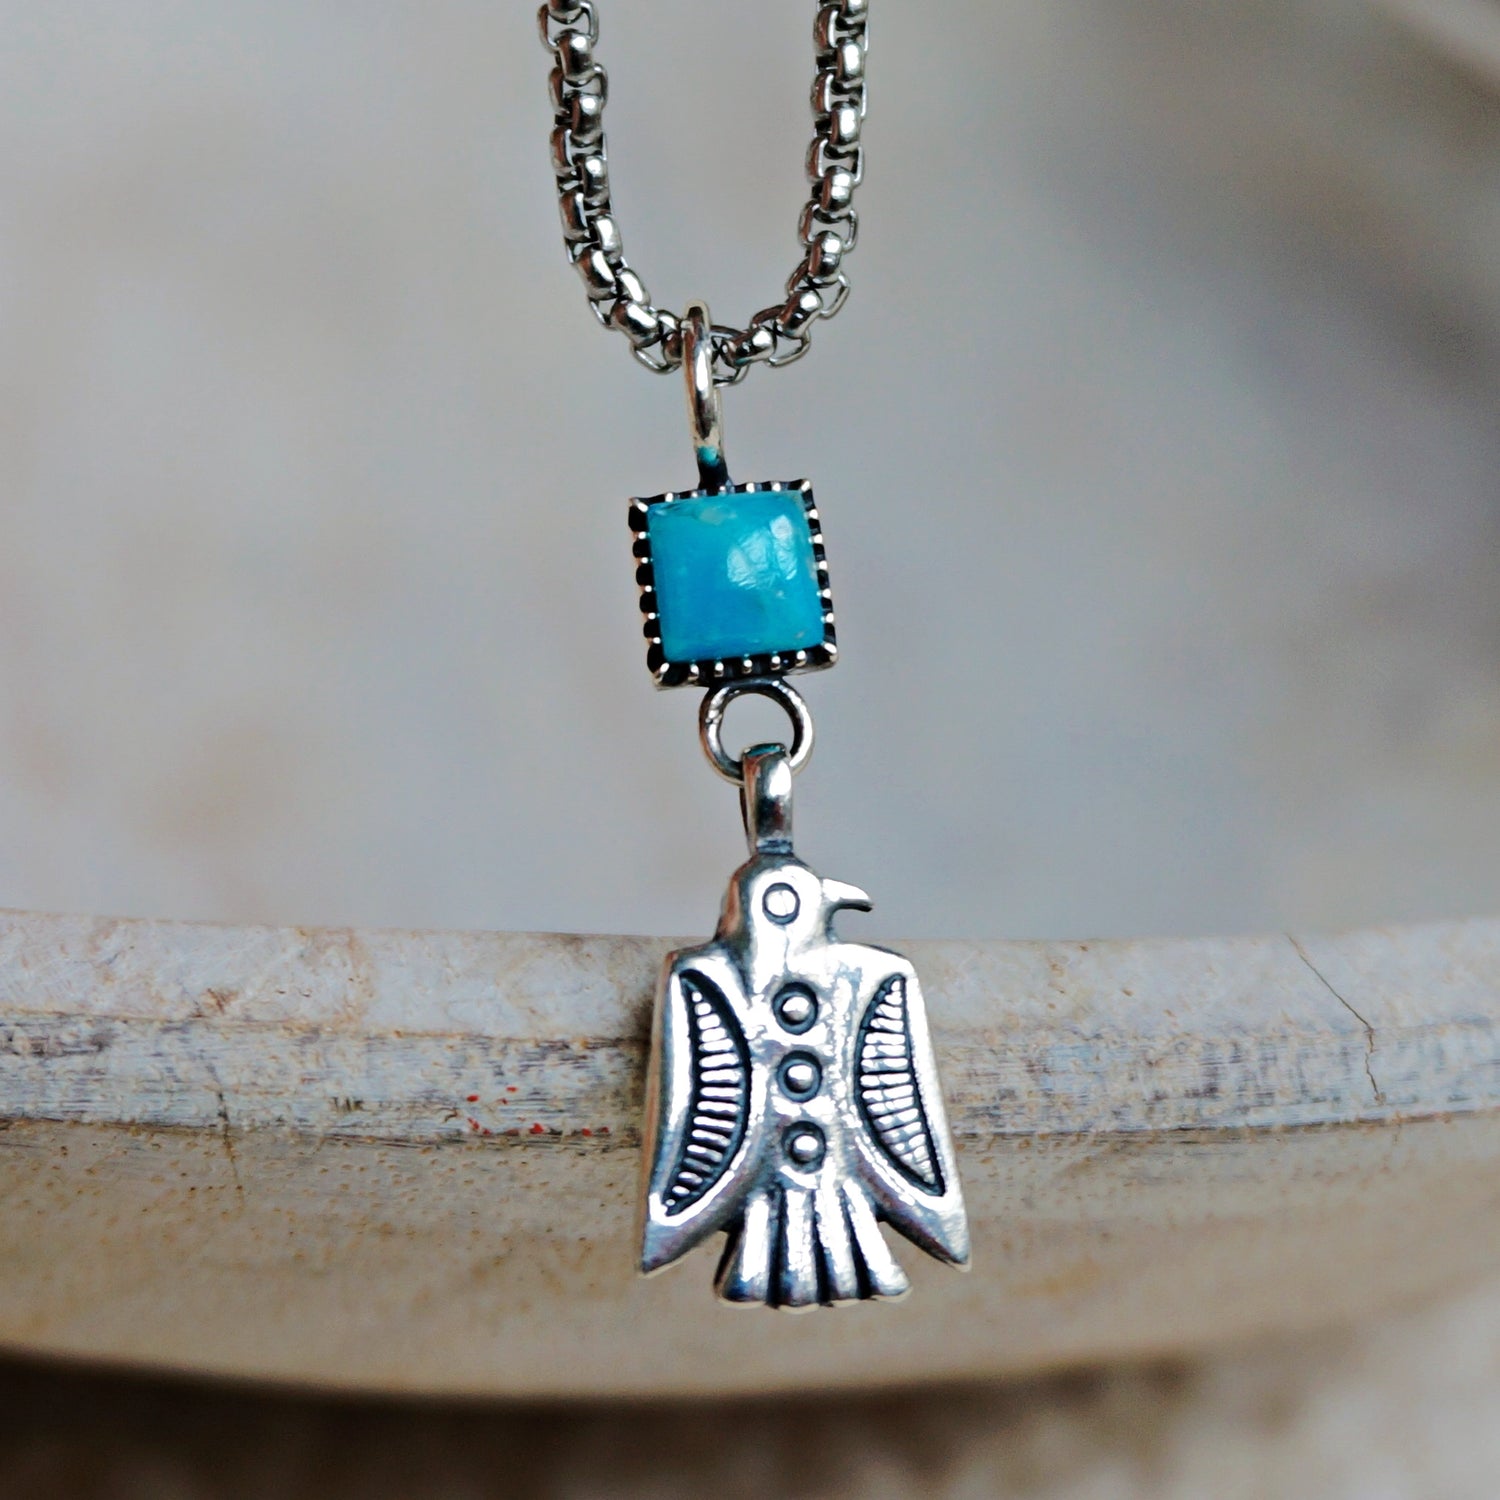 Thunderbird Charm Necklace - Sterling Silver - Moon Room Shop and Wellness